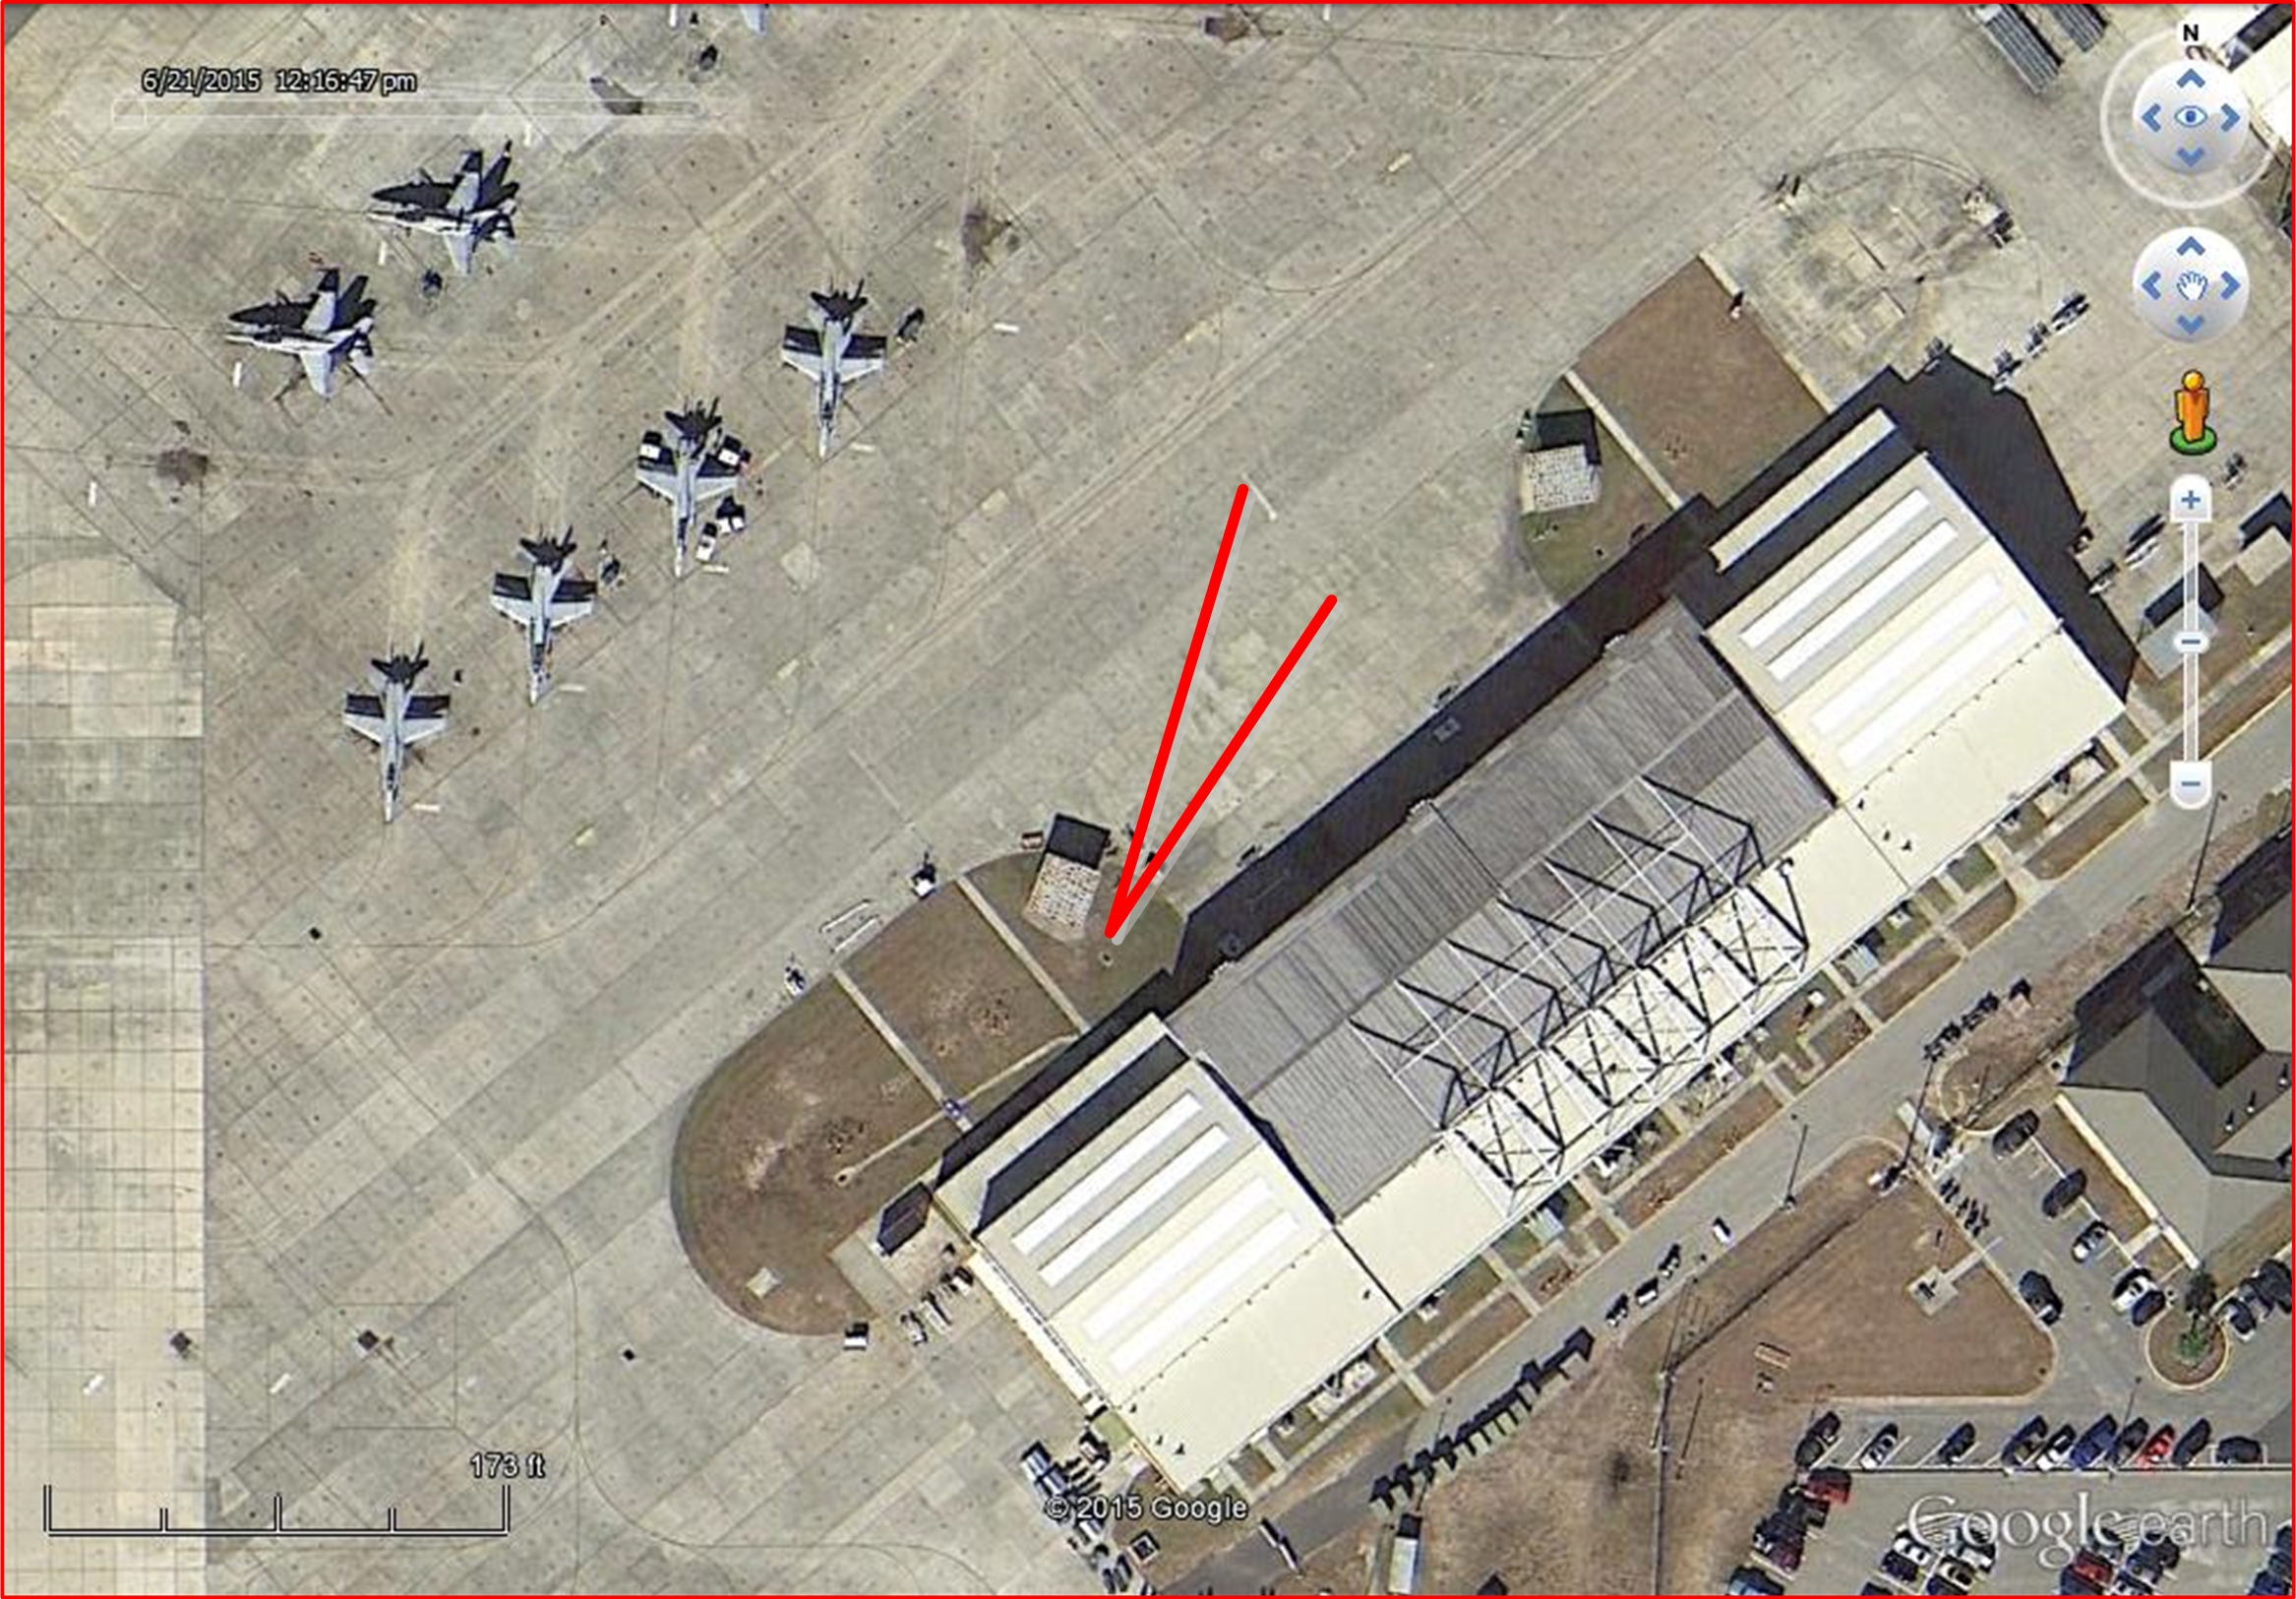 Horizontal well locations - Drill rig positioned adjacent to treatment building, with no room for waste containment. Rolloff staged off of the flight line.